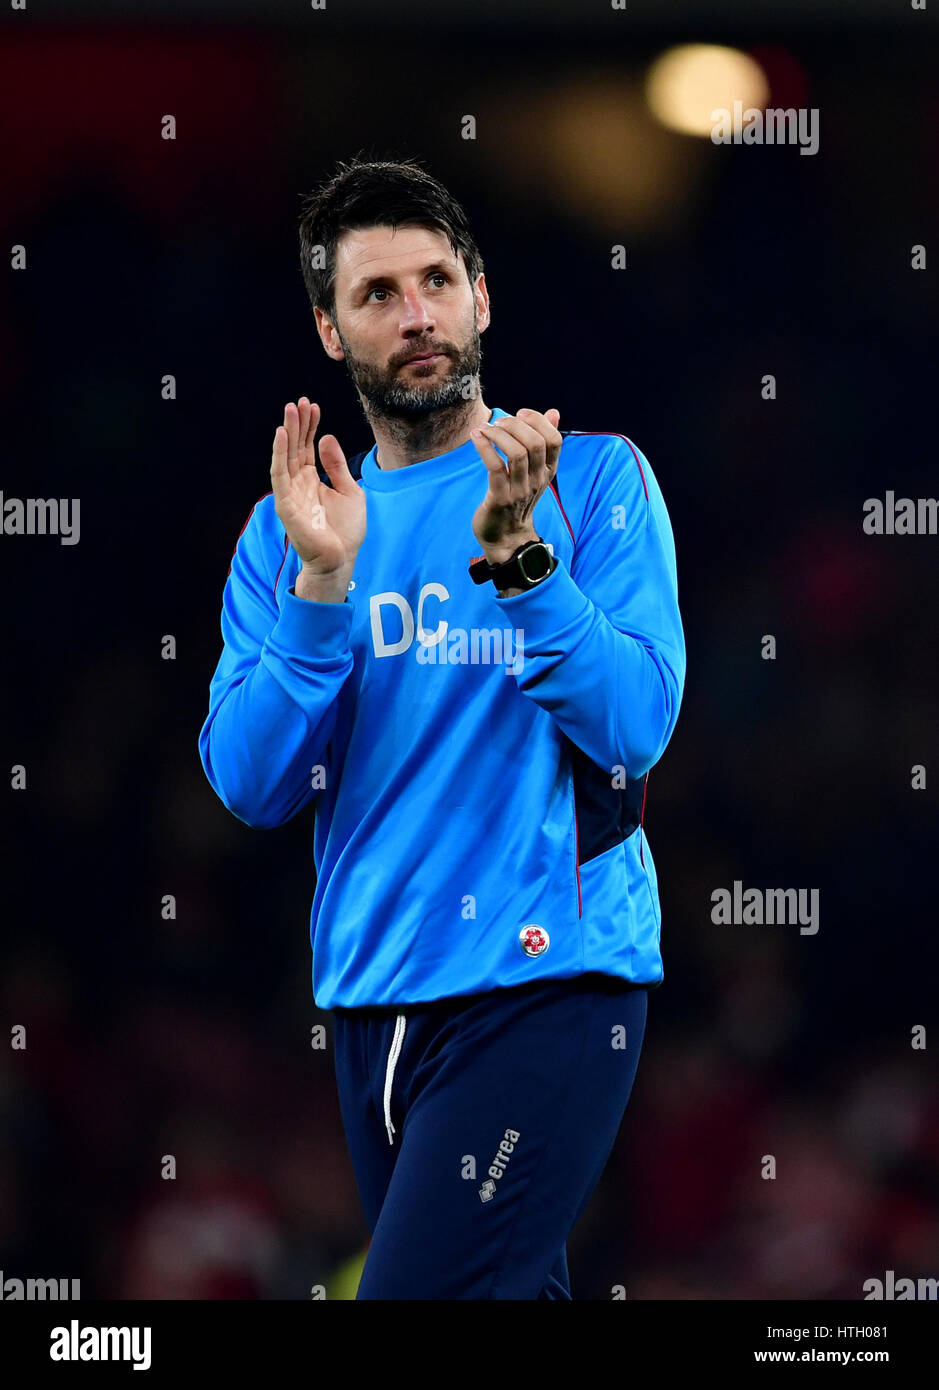 Lincoln City manager Danny Cowley during the Emirates FA Cup quarter final at The Emirates Stadium, London. PRESS ASSOCIATION Photo. Picture date: Saturday March 11, 2017. See PA story SOCCER Arsenal. Photo credit should read: Dominic Lipinski/PA Wire. RESTRICTIONS: No use with unauthorised audio, video, data, fixture lists, club/league logos or 'live' services. Online in-match use limited to 75 images, no video emulation. No use in betting, games or single club/league/player publications. Stock Photo